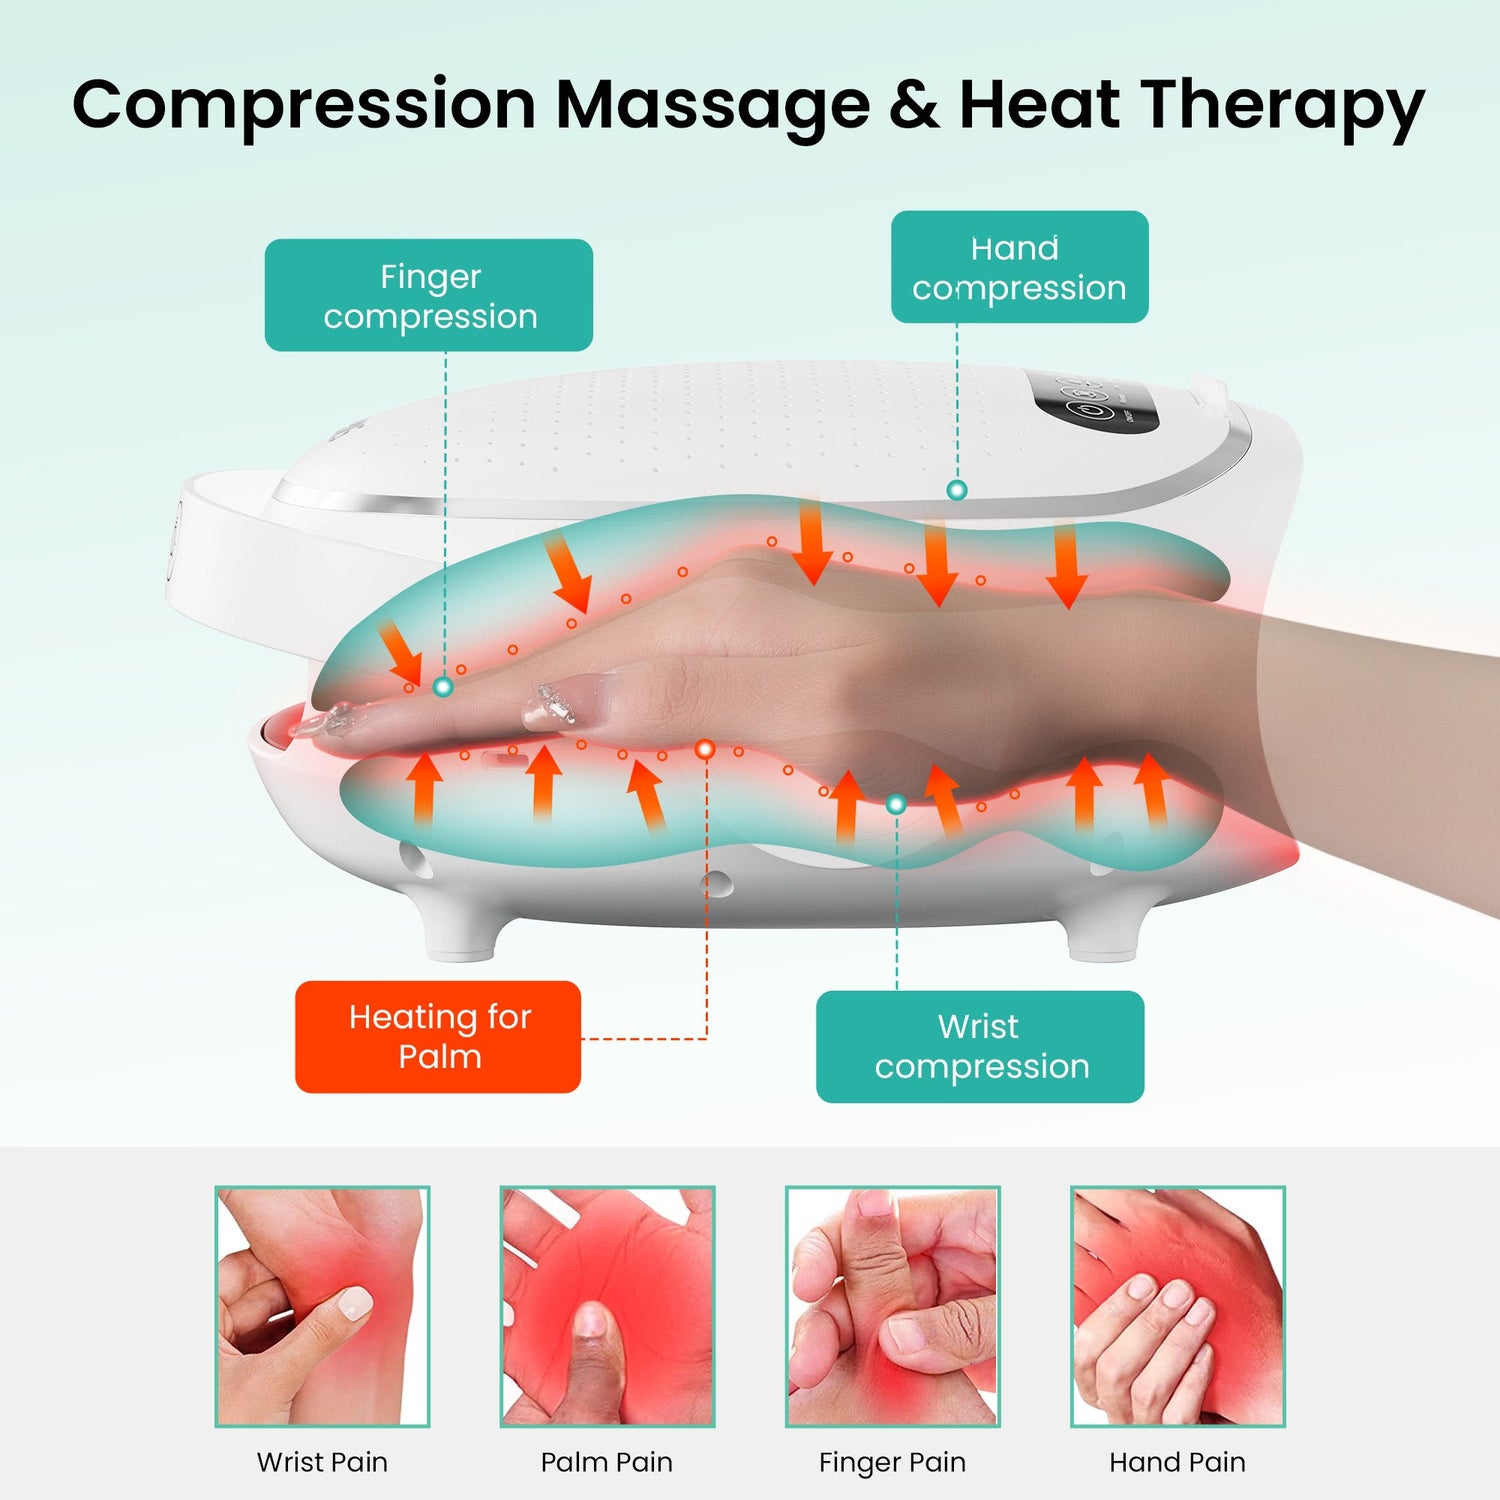 Hand Massager with APP Control